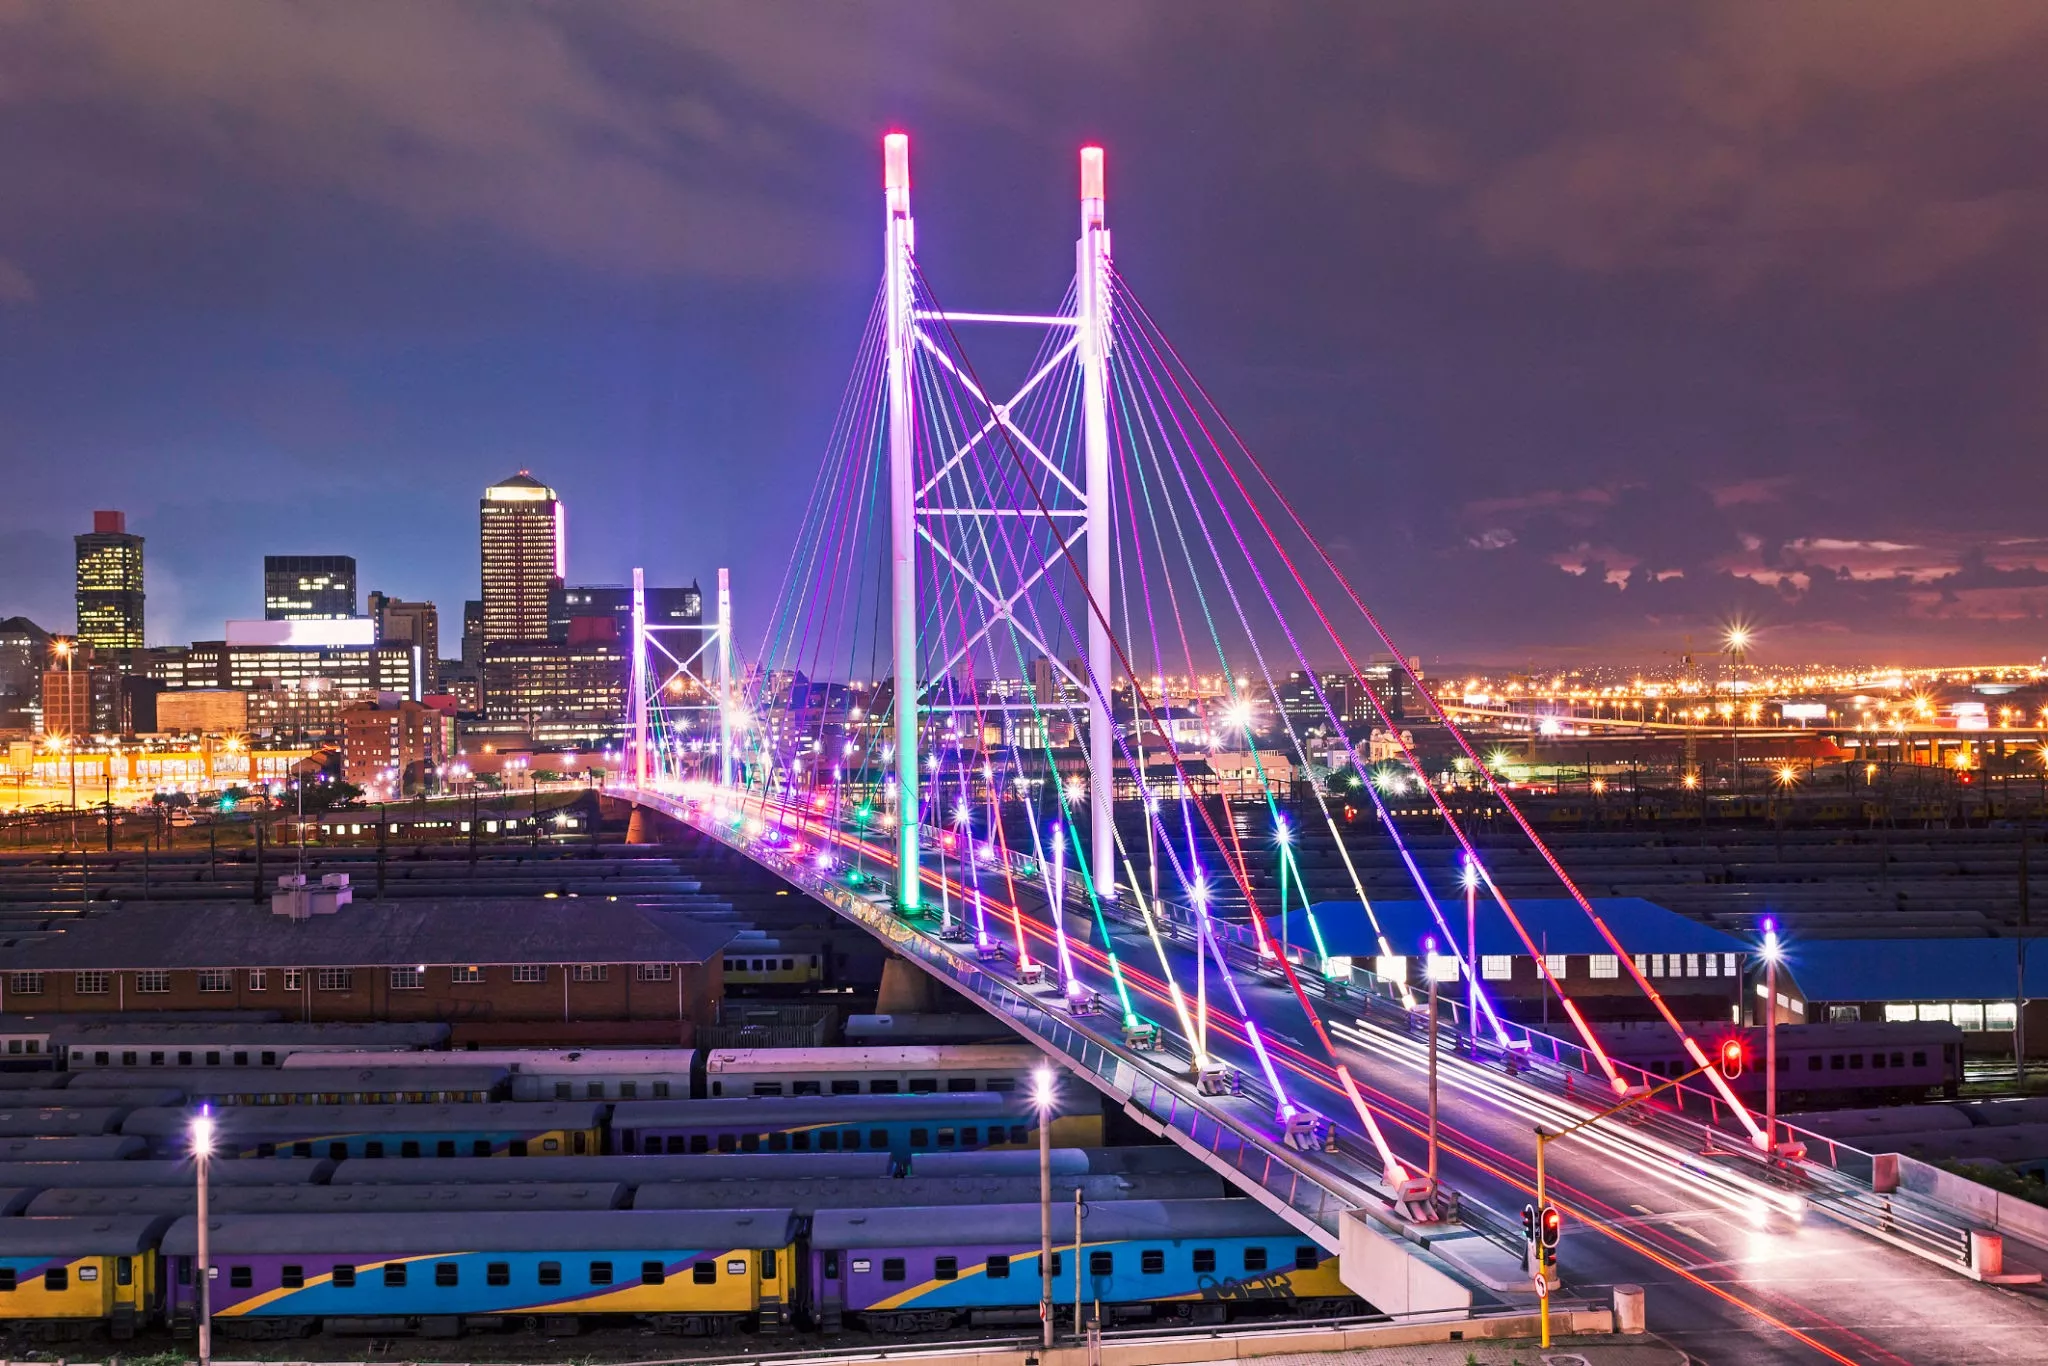 Nelson Mandela Bridge in South Africa, Africa | Architecture - Rated 3.2